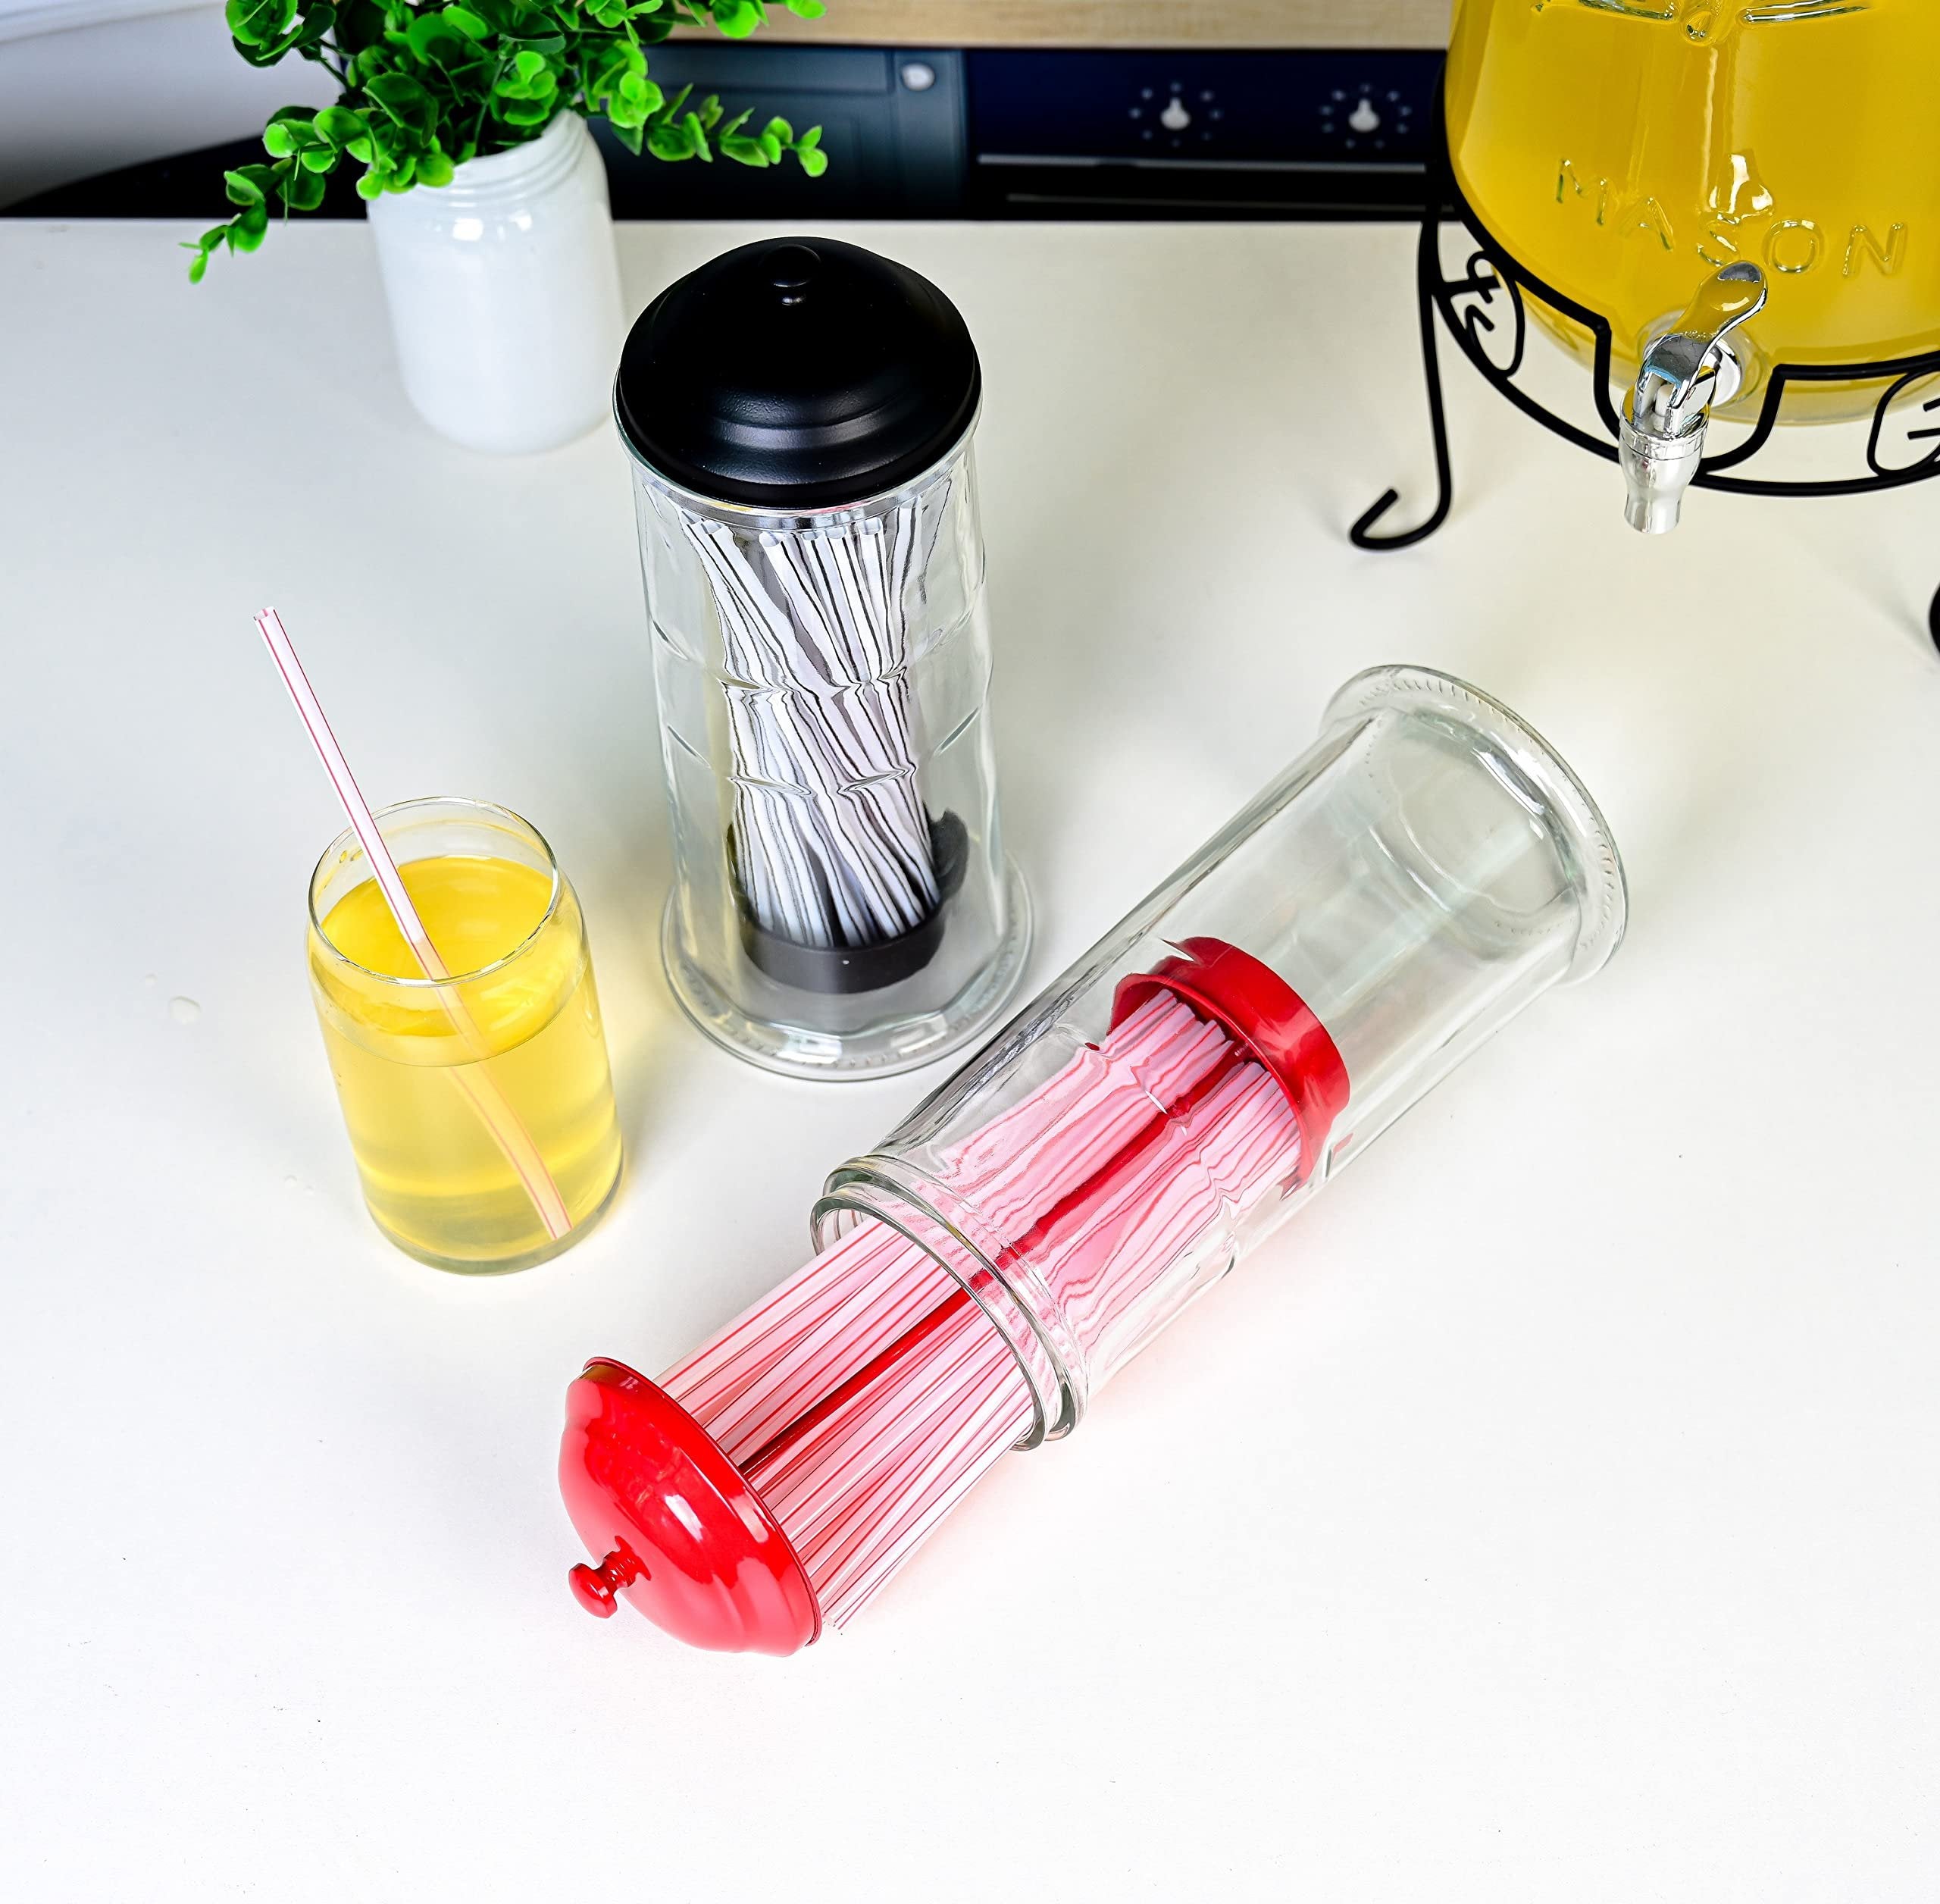 GADGETWIZ Red Glass Straw Dispenser w/ Stainless Steel Lid | Holds Straws up to 8.5 | Free Shipping & Returns"